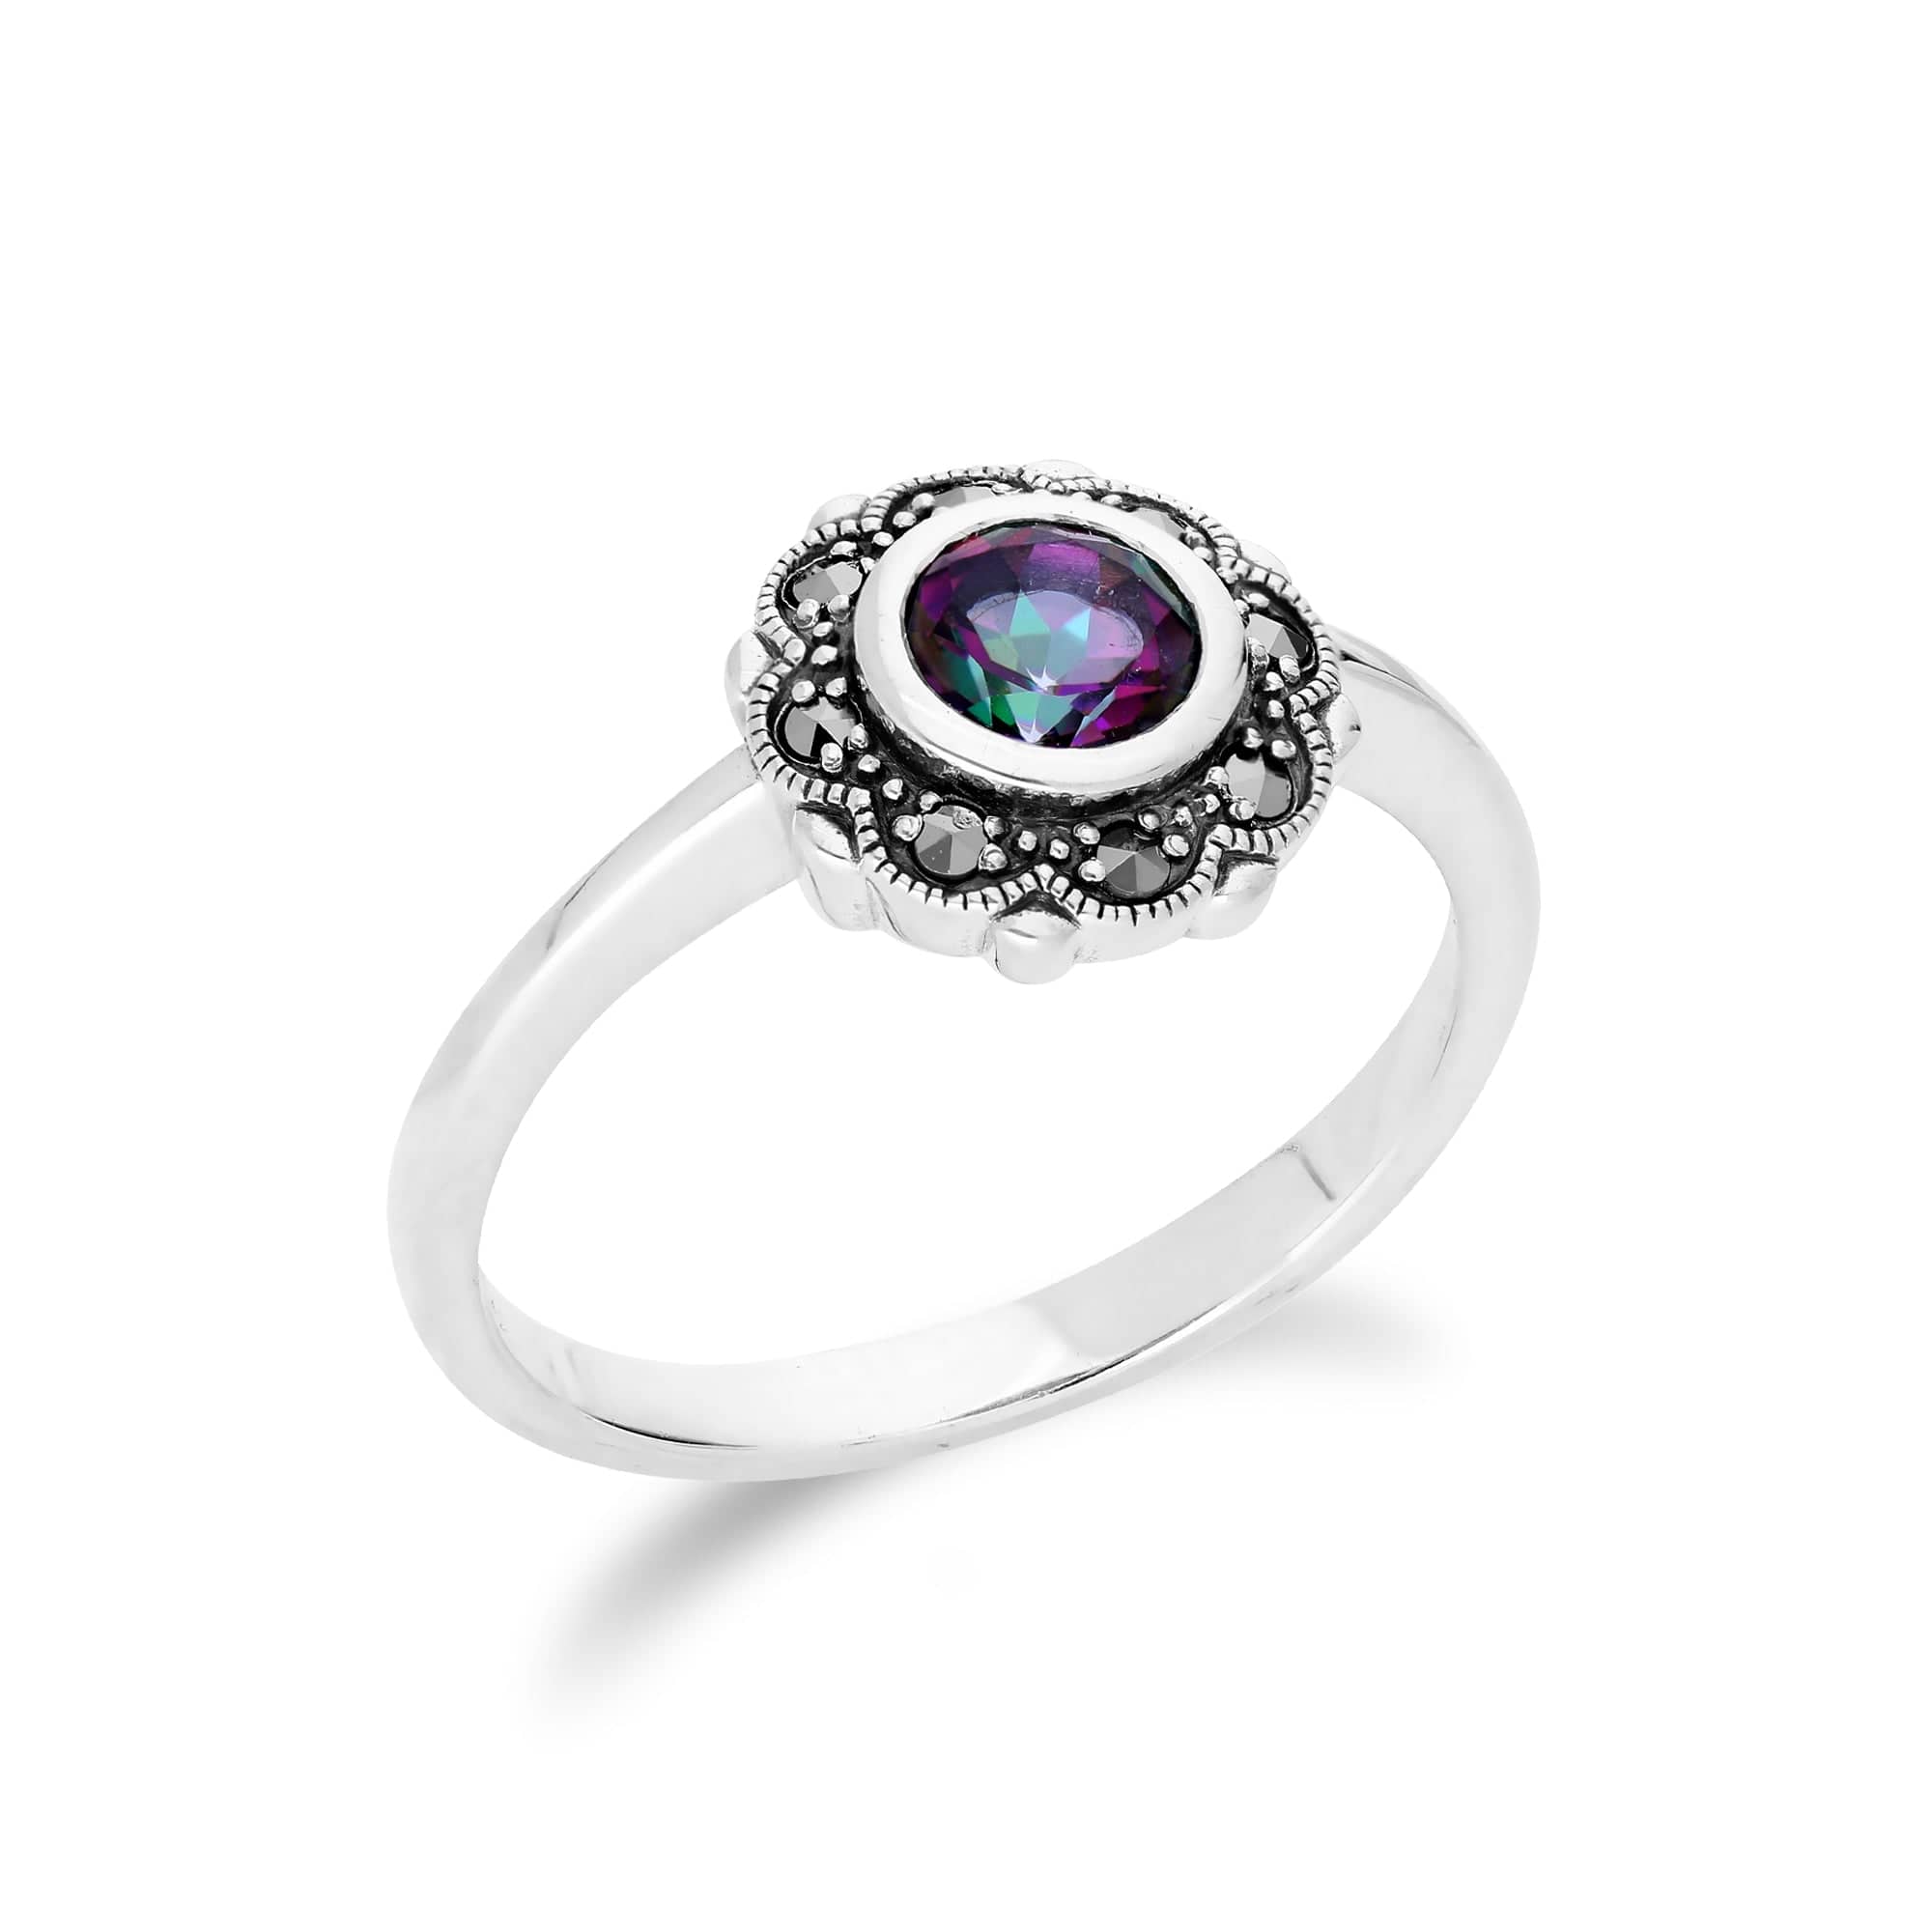 Floral Round Mystic Topaz & Marcasite Halo Ring in 925 Sterling Silver - Gemondo